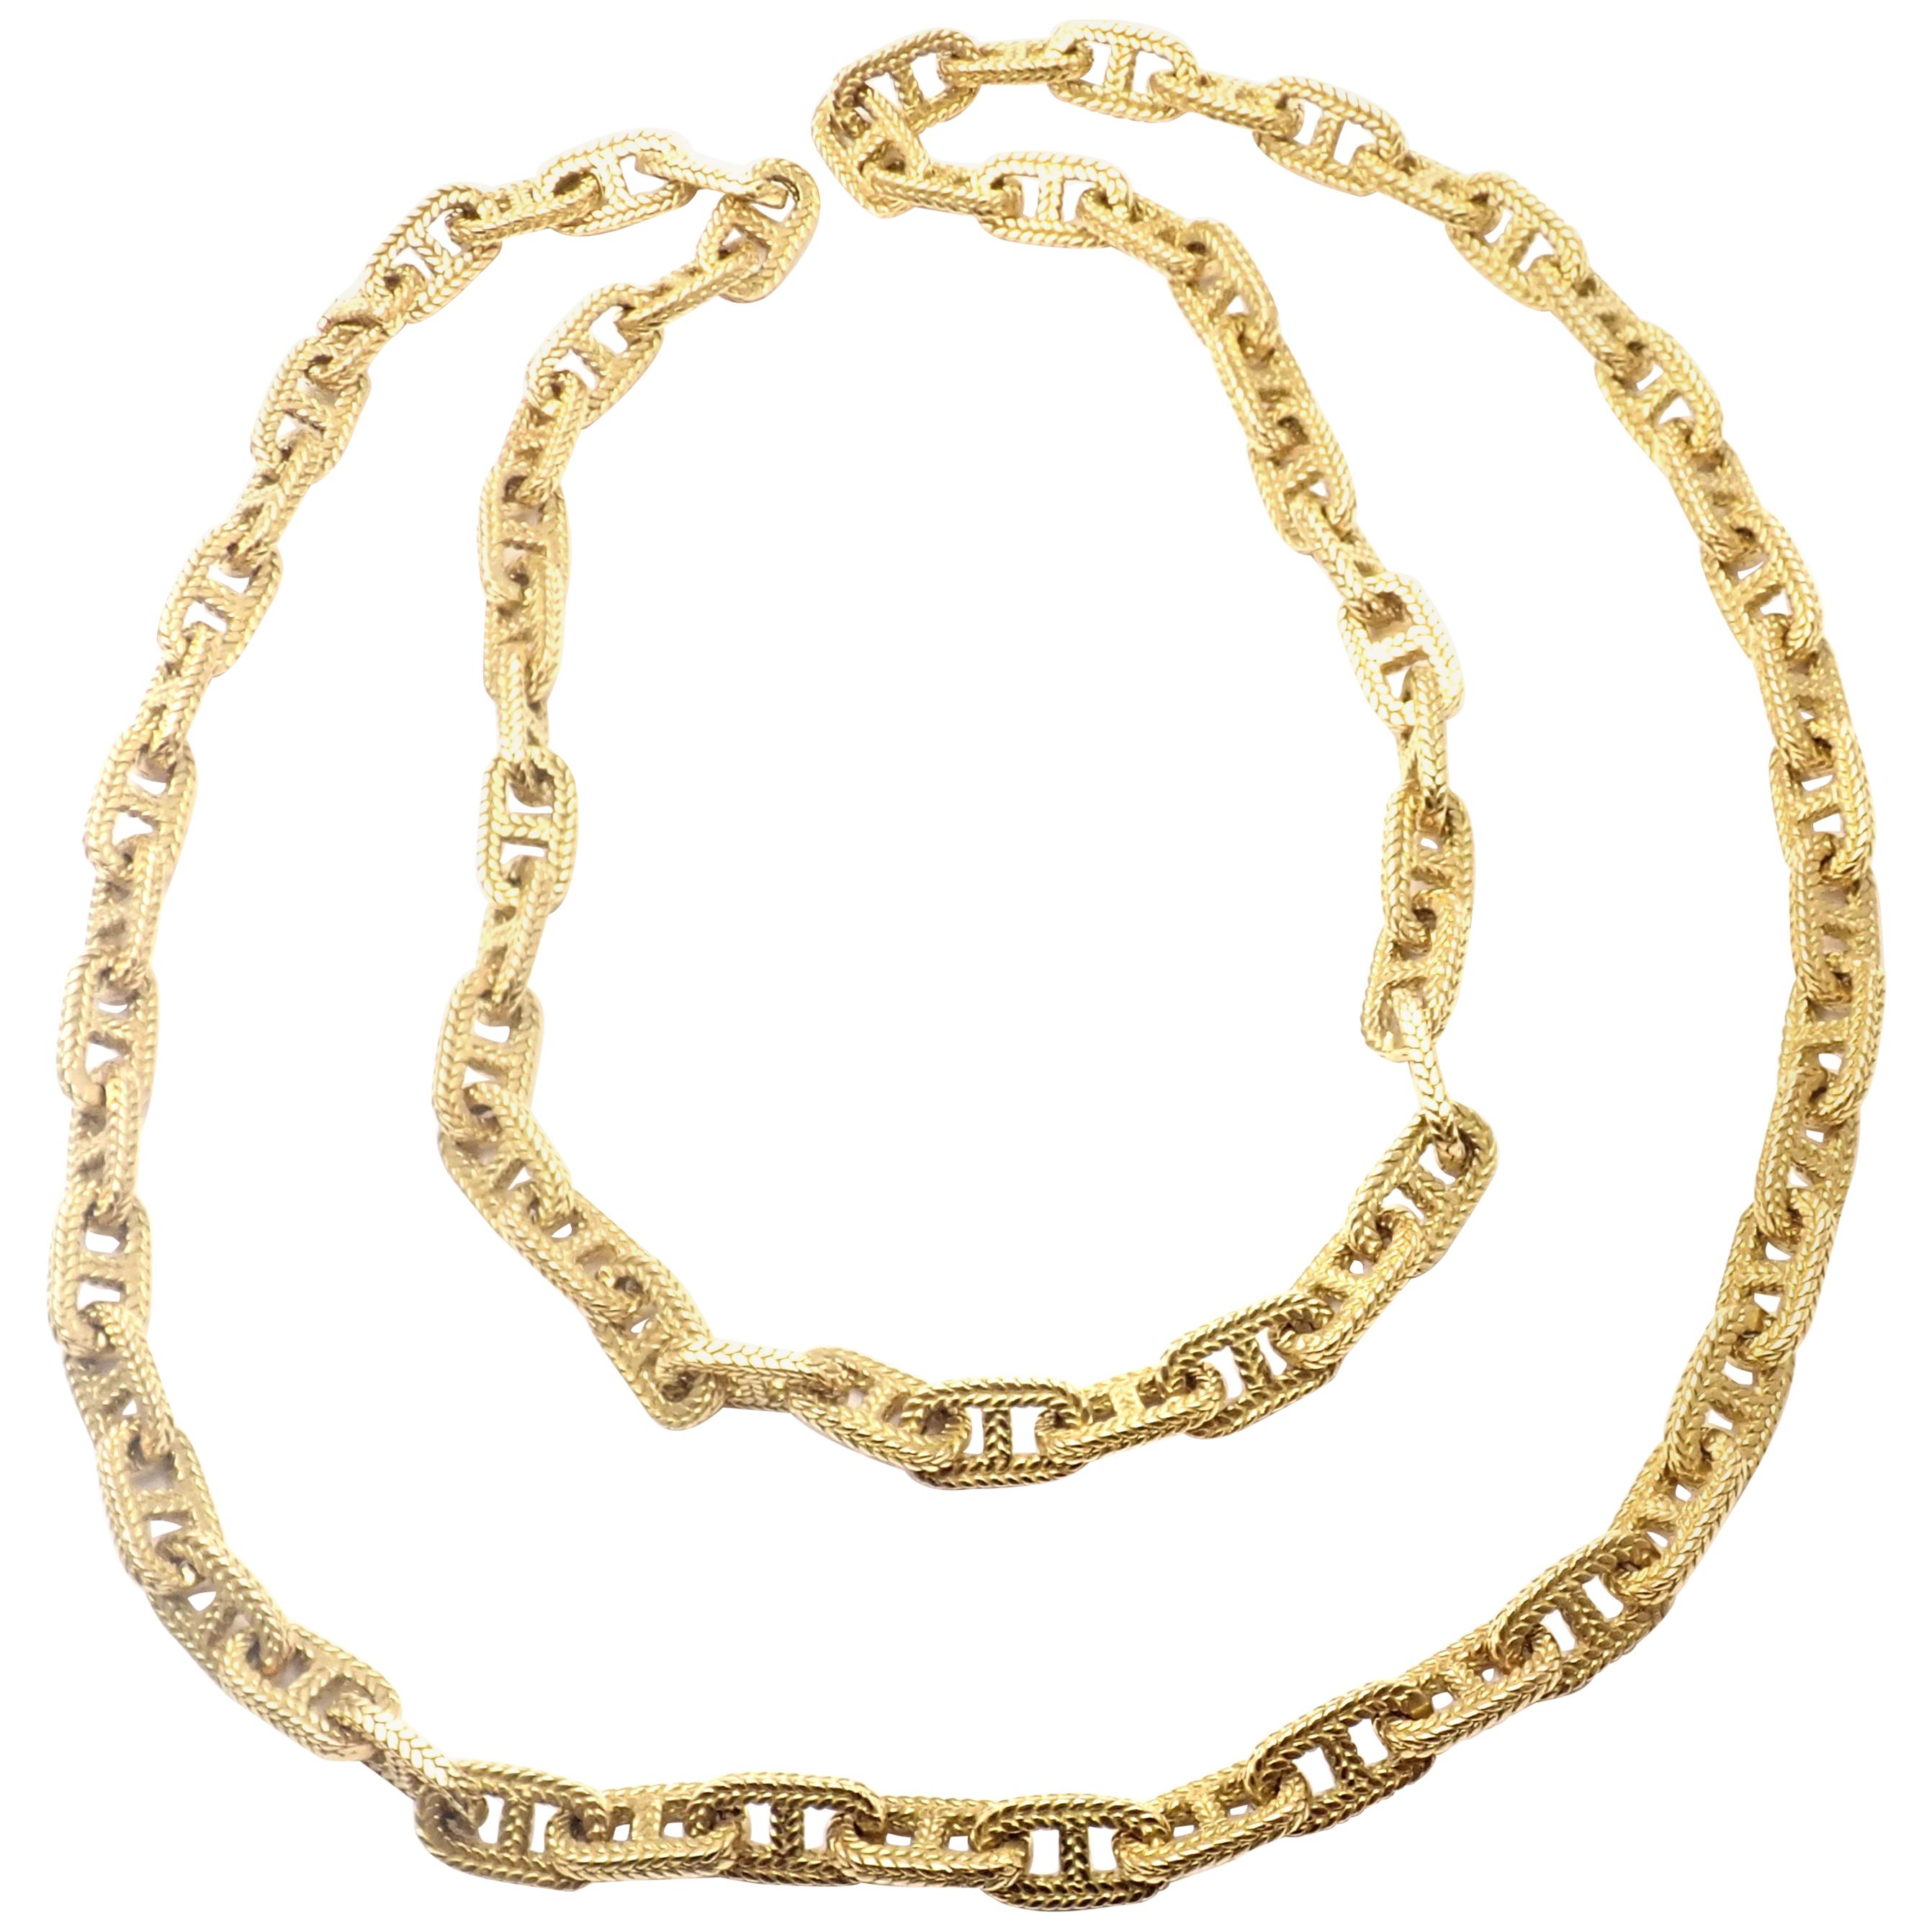 Hermes George L'Enfant Chain d'Ancre Yellow Gold Link Necklace